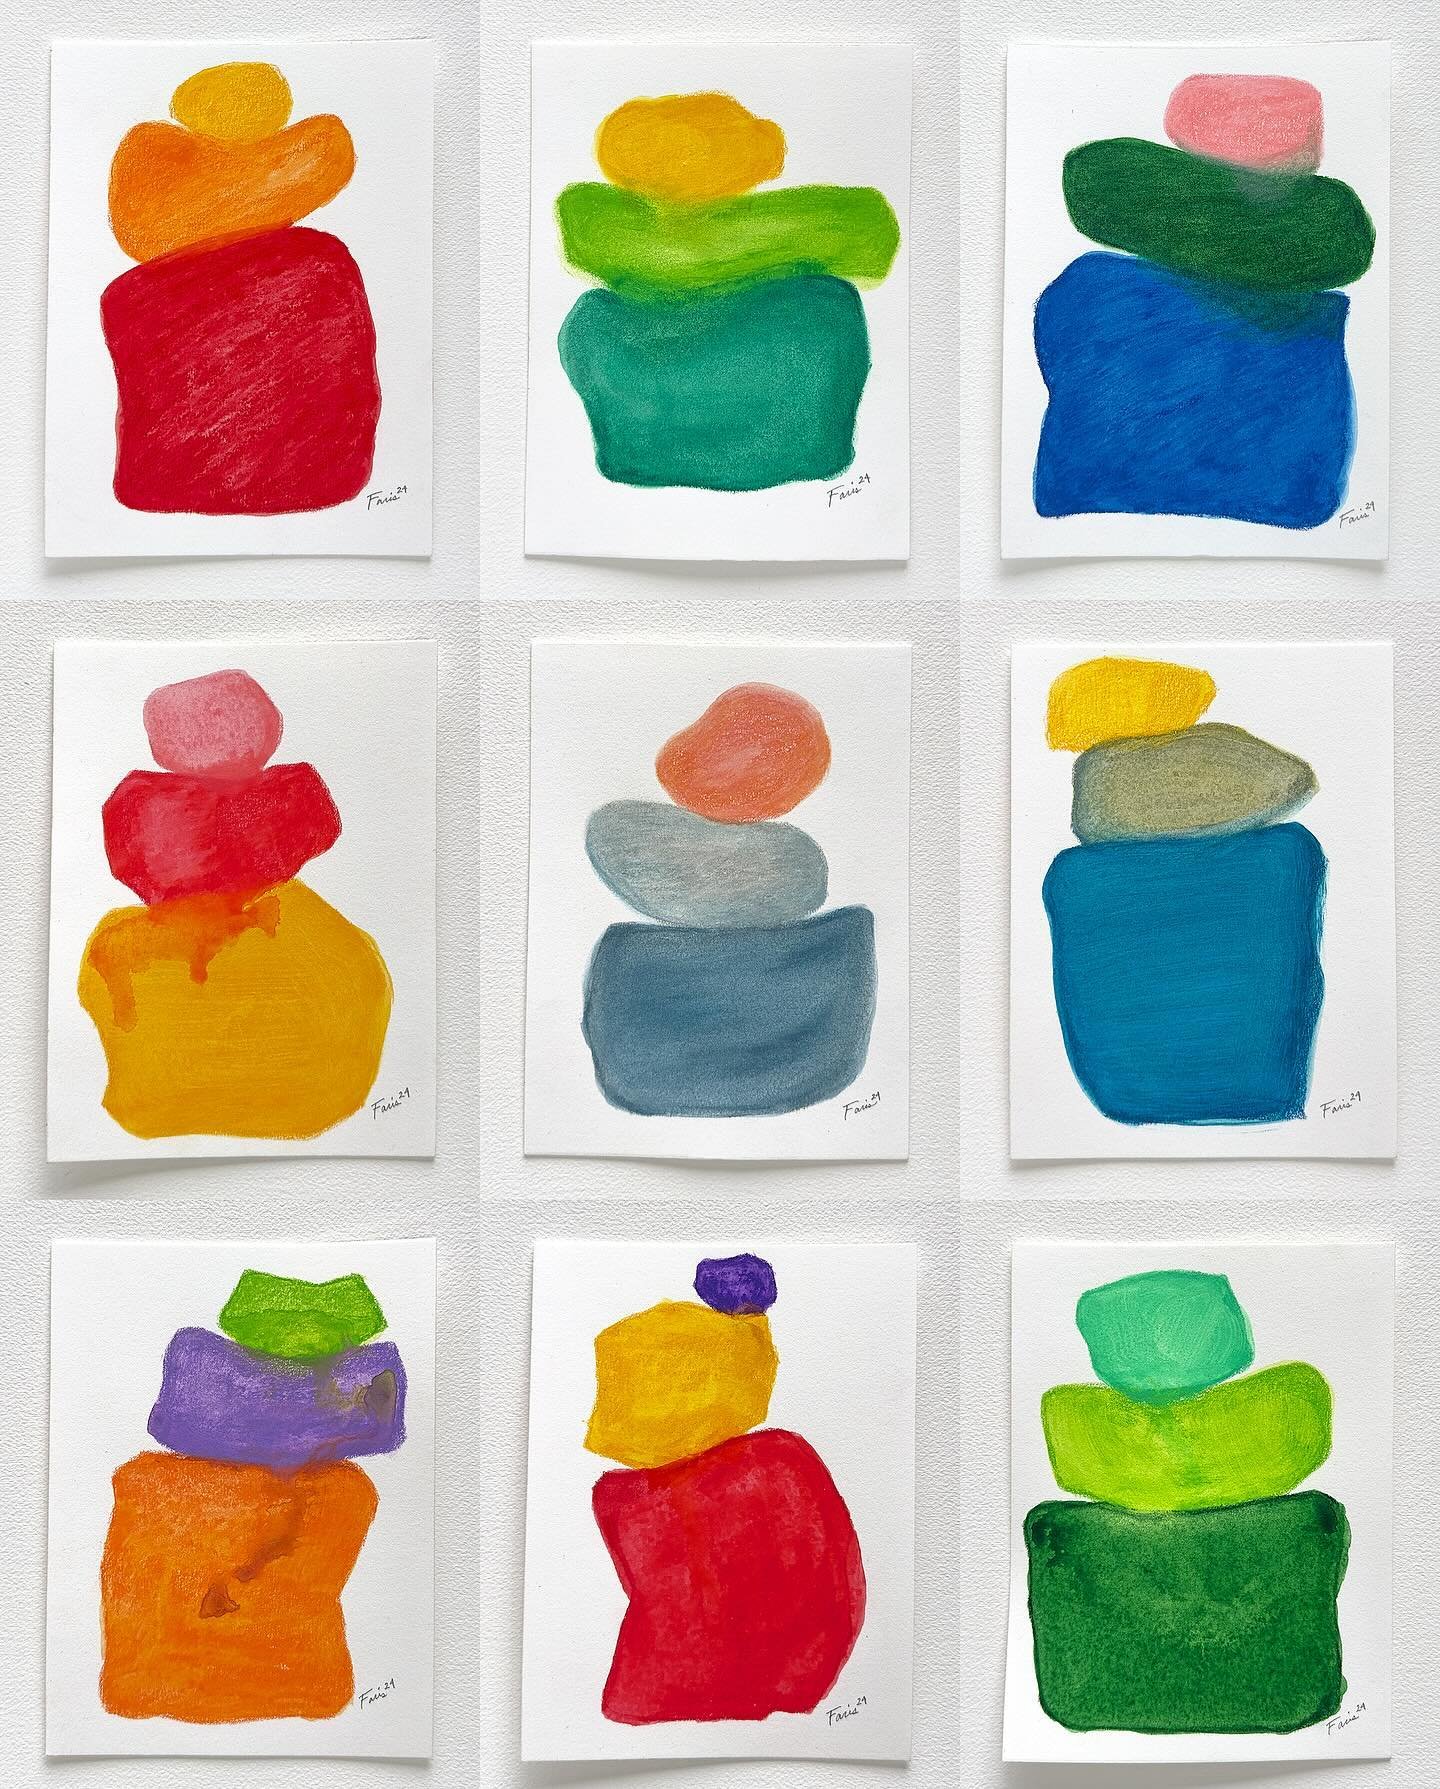 Nine new studies now available. All are 8 x 6 in. on Strathmore heavyweight paper (350lb). These studies are explorations in color and form relationships as I consider larger works on canvas. I&rsquo;m enjoying the playful feeling of these. They feel